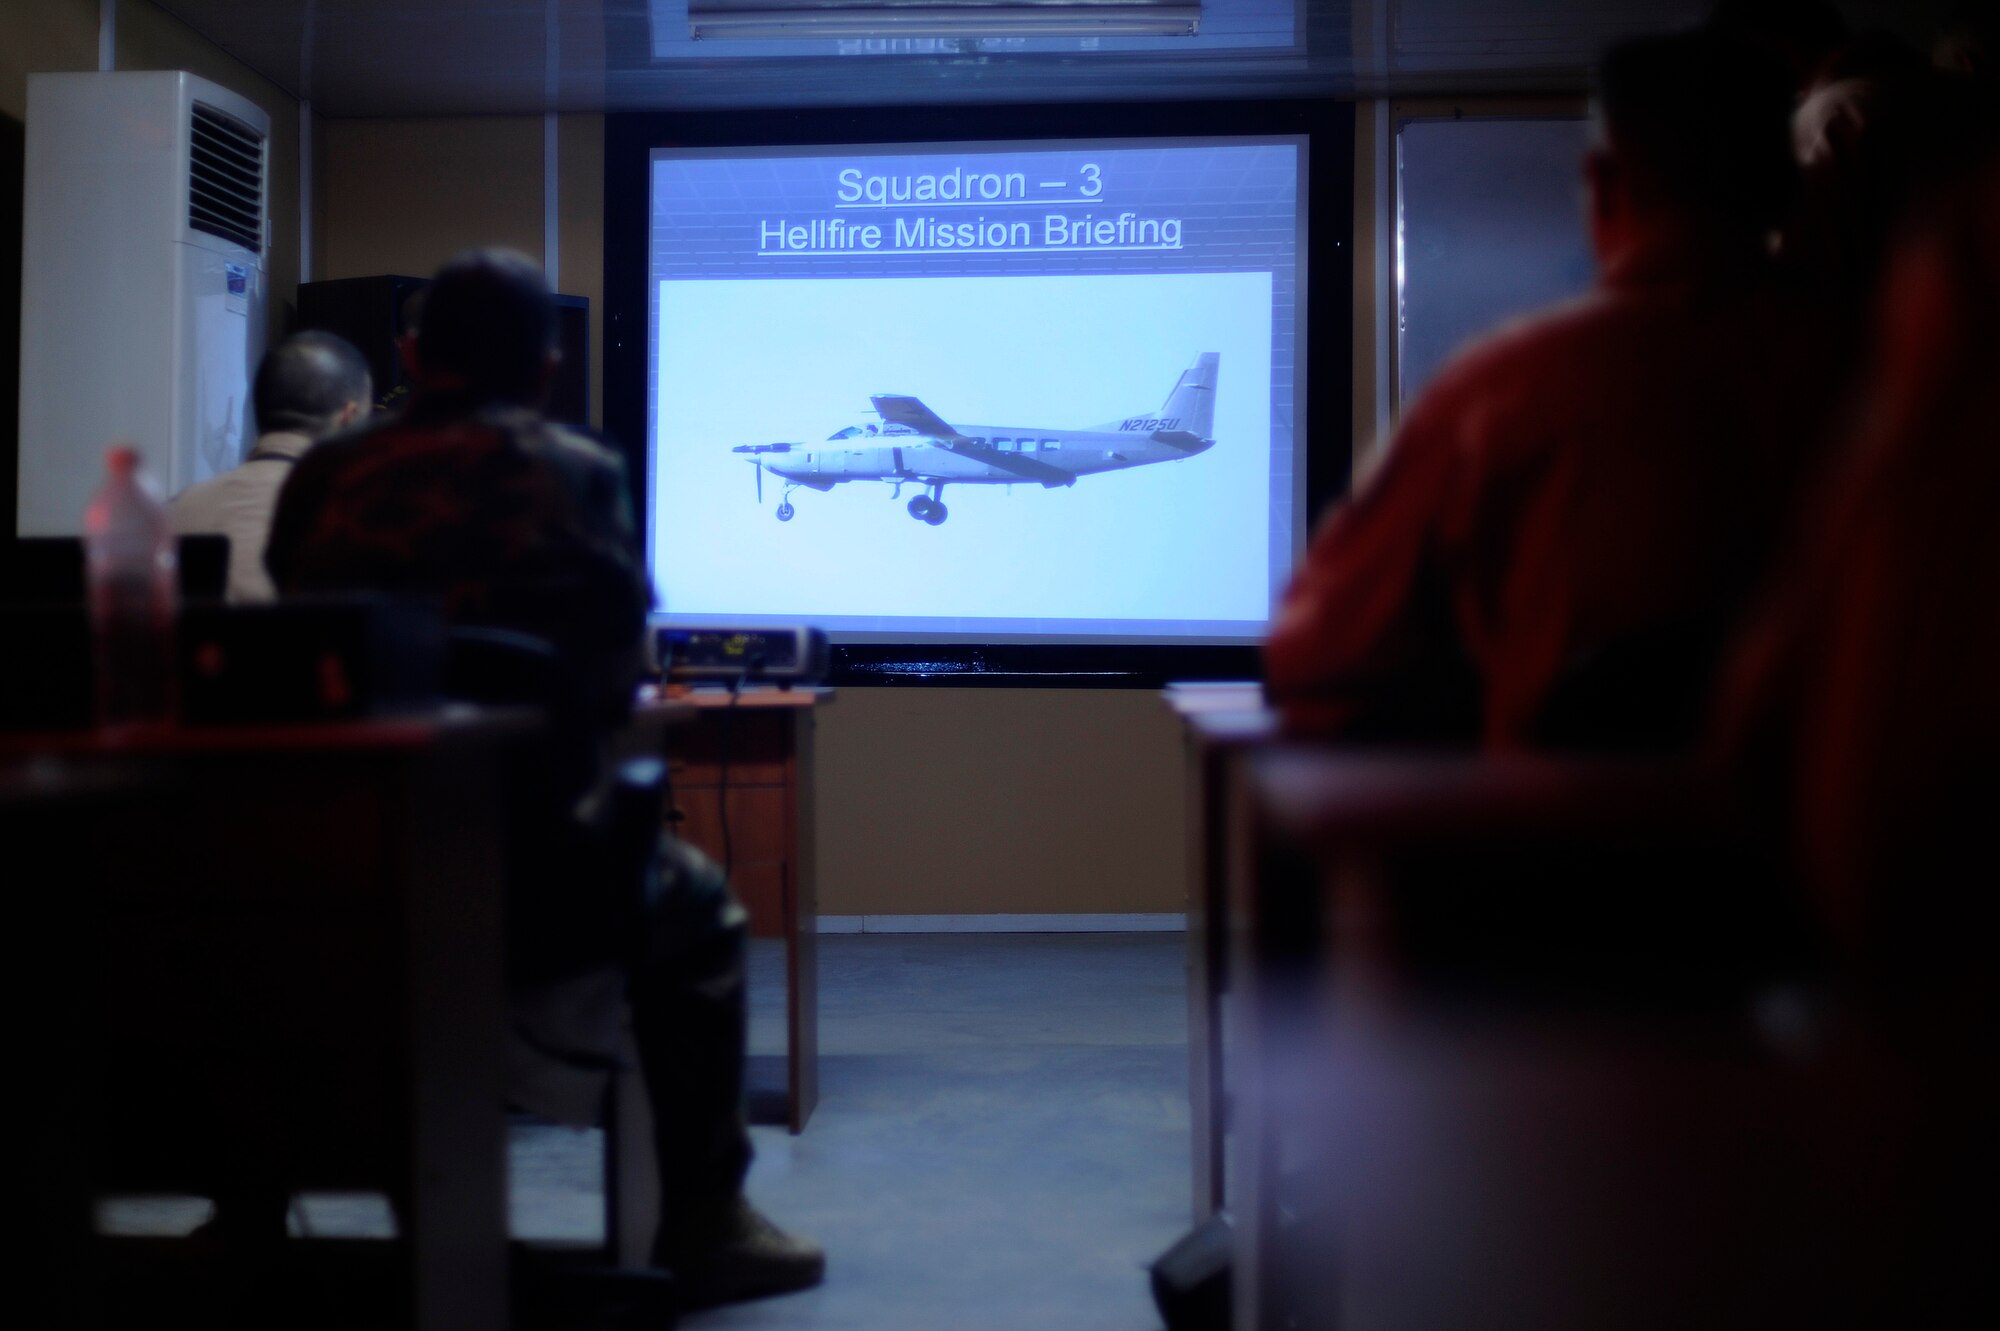 An Iraqi Air Force AC-208B Combat Caravan crew from Squadron 3 at Kirkuk Air Base, Iraq, conducts a mission briefing prior to a training mission, Oct. 27, 2009.  This Iraqi crew is preparing for the first AGM-114 Hellfire missile launch since the re-formation of its air force on Nov. 4.  (U.S. Air Force photo by Staff Sgt. Michael B. Keller) (Released)

